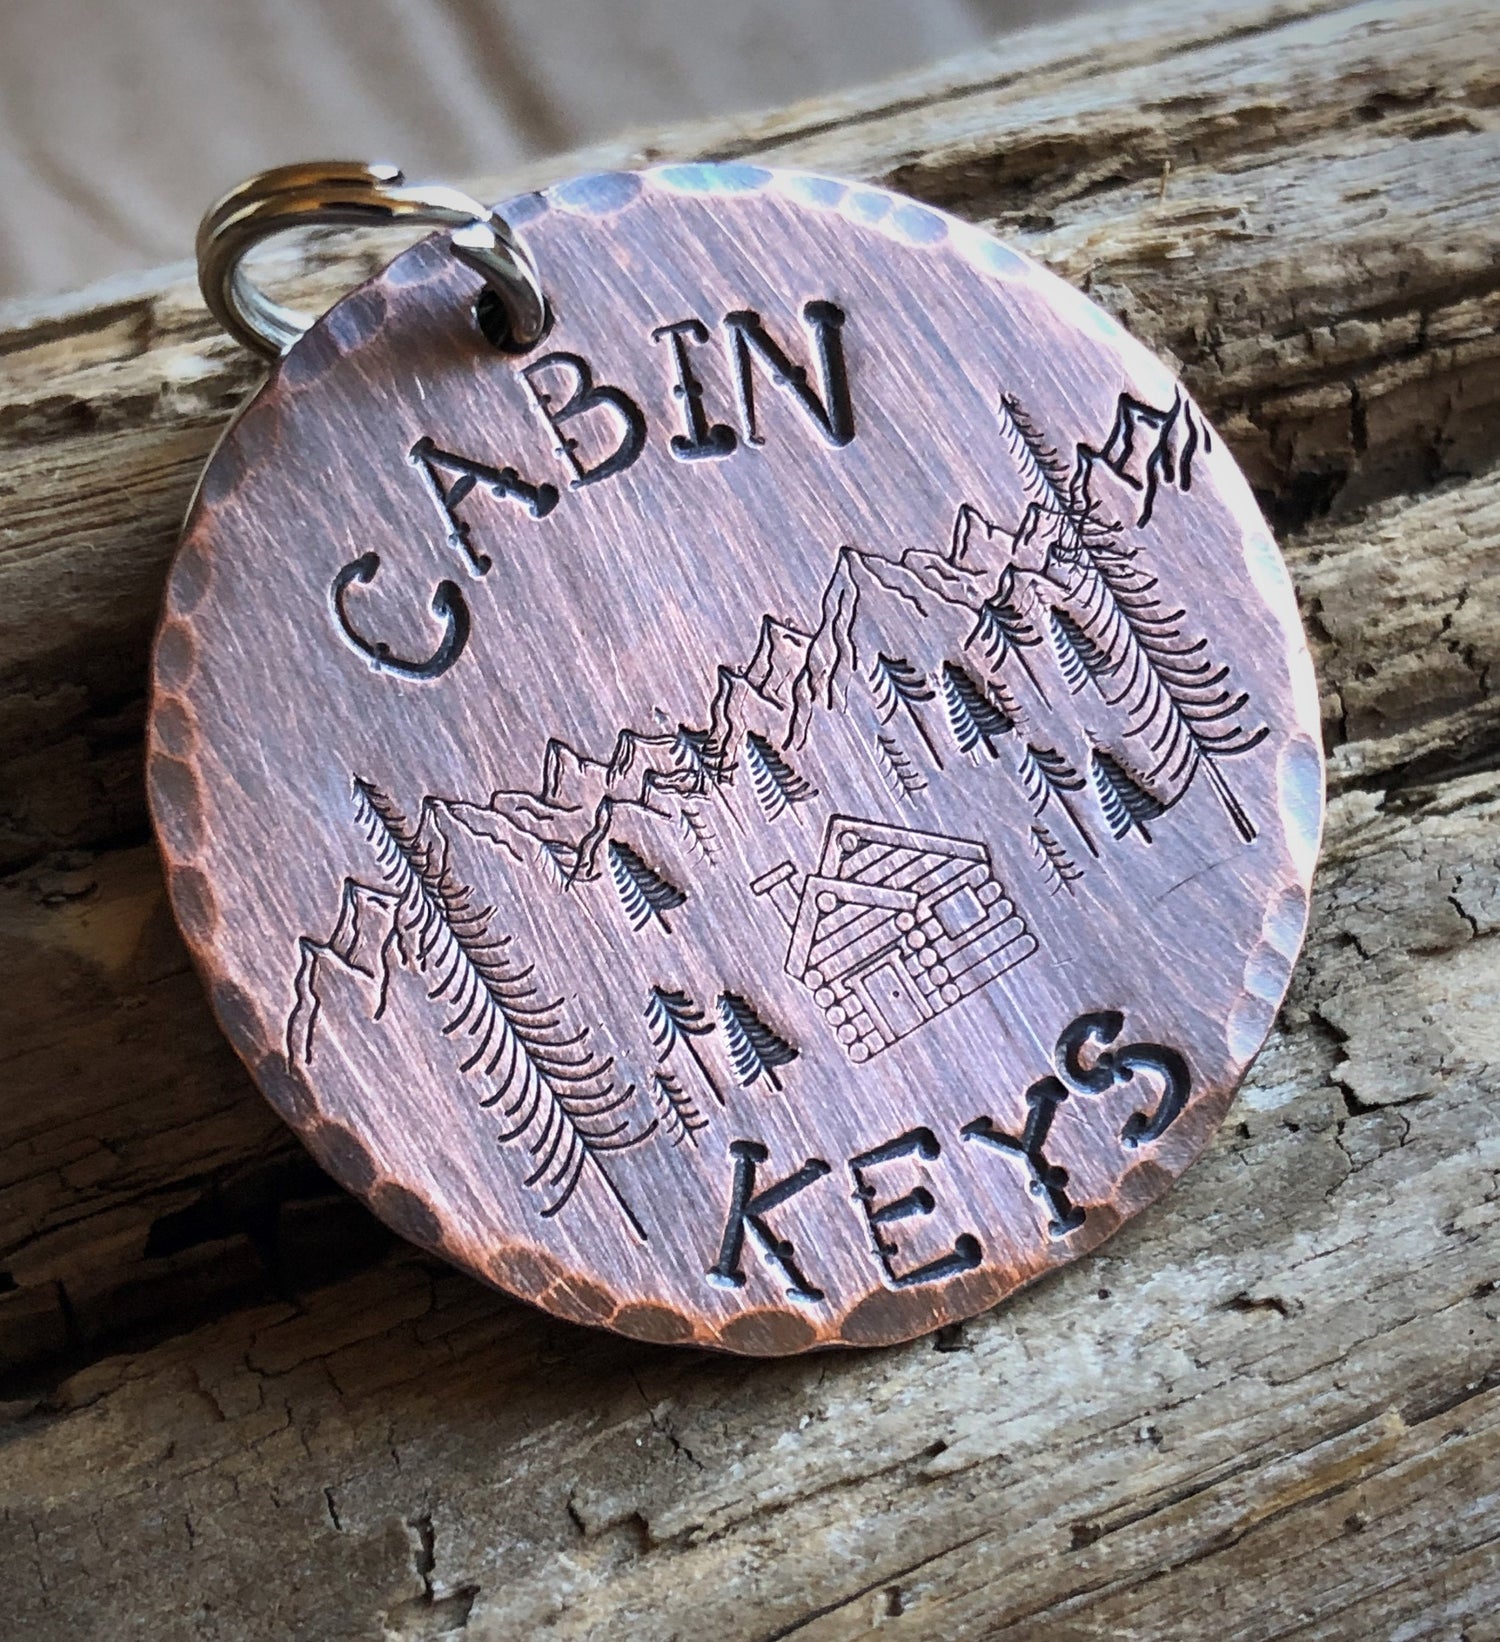 Cabin Keys, Keychain for Cabin, Cottage Keychain, Gift for Second Home, Hand Stamped Cabin Keychain, Housewarming Gift